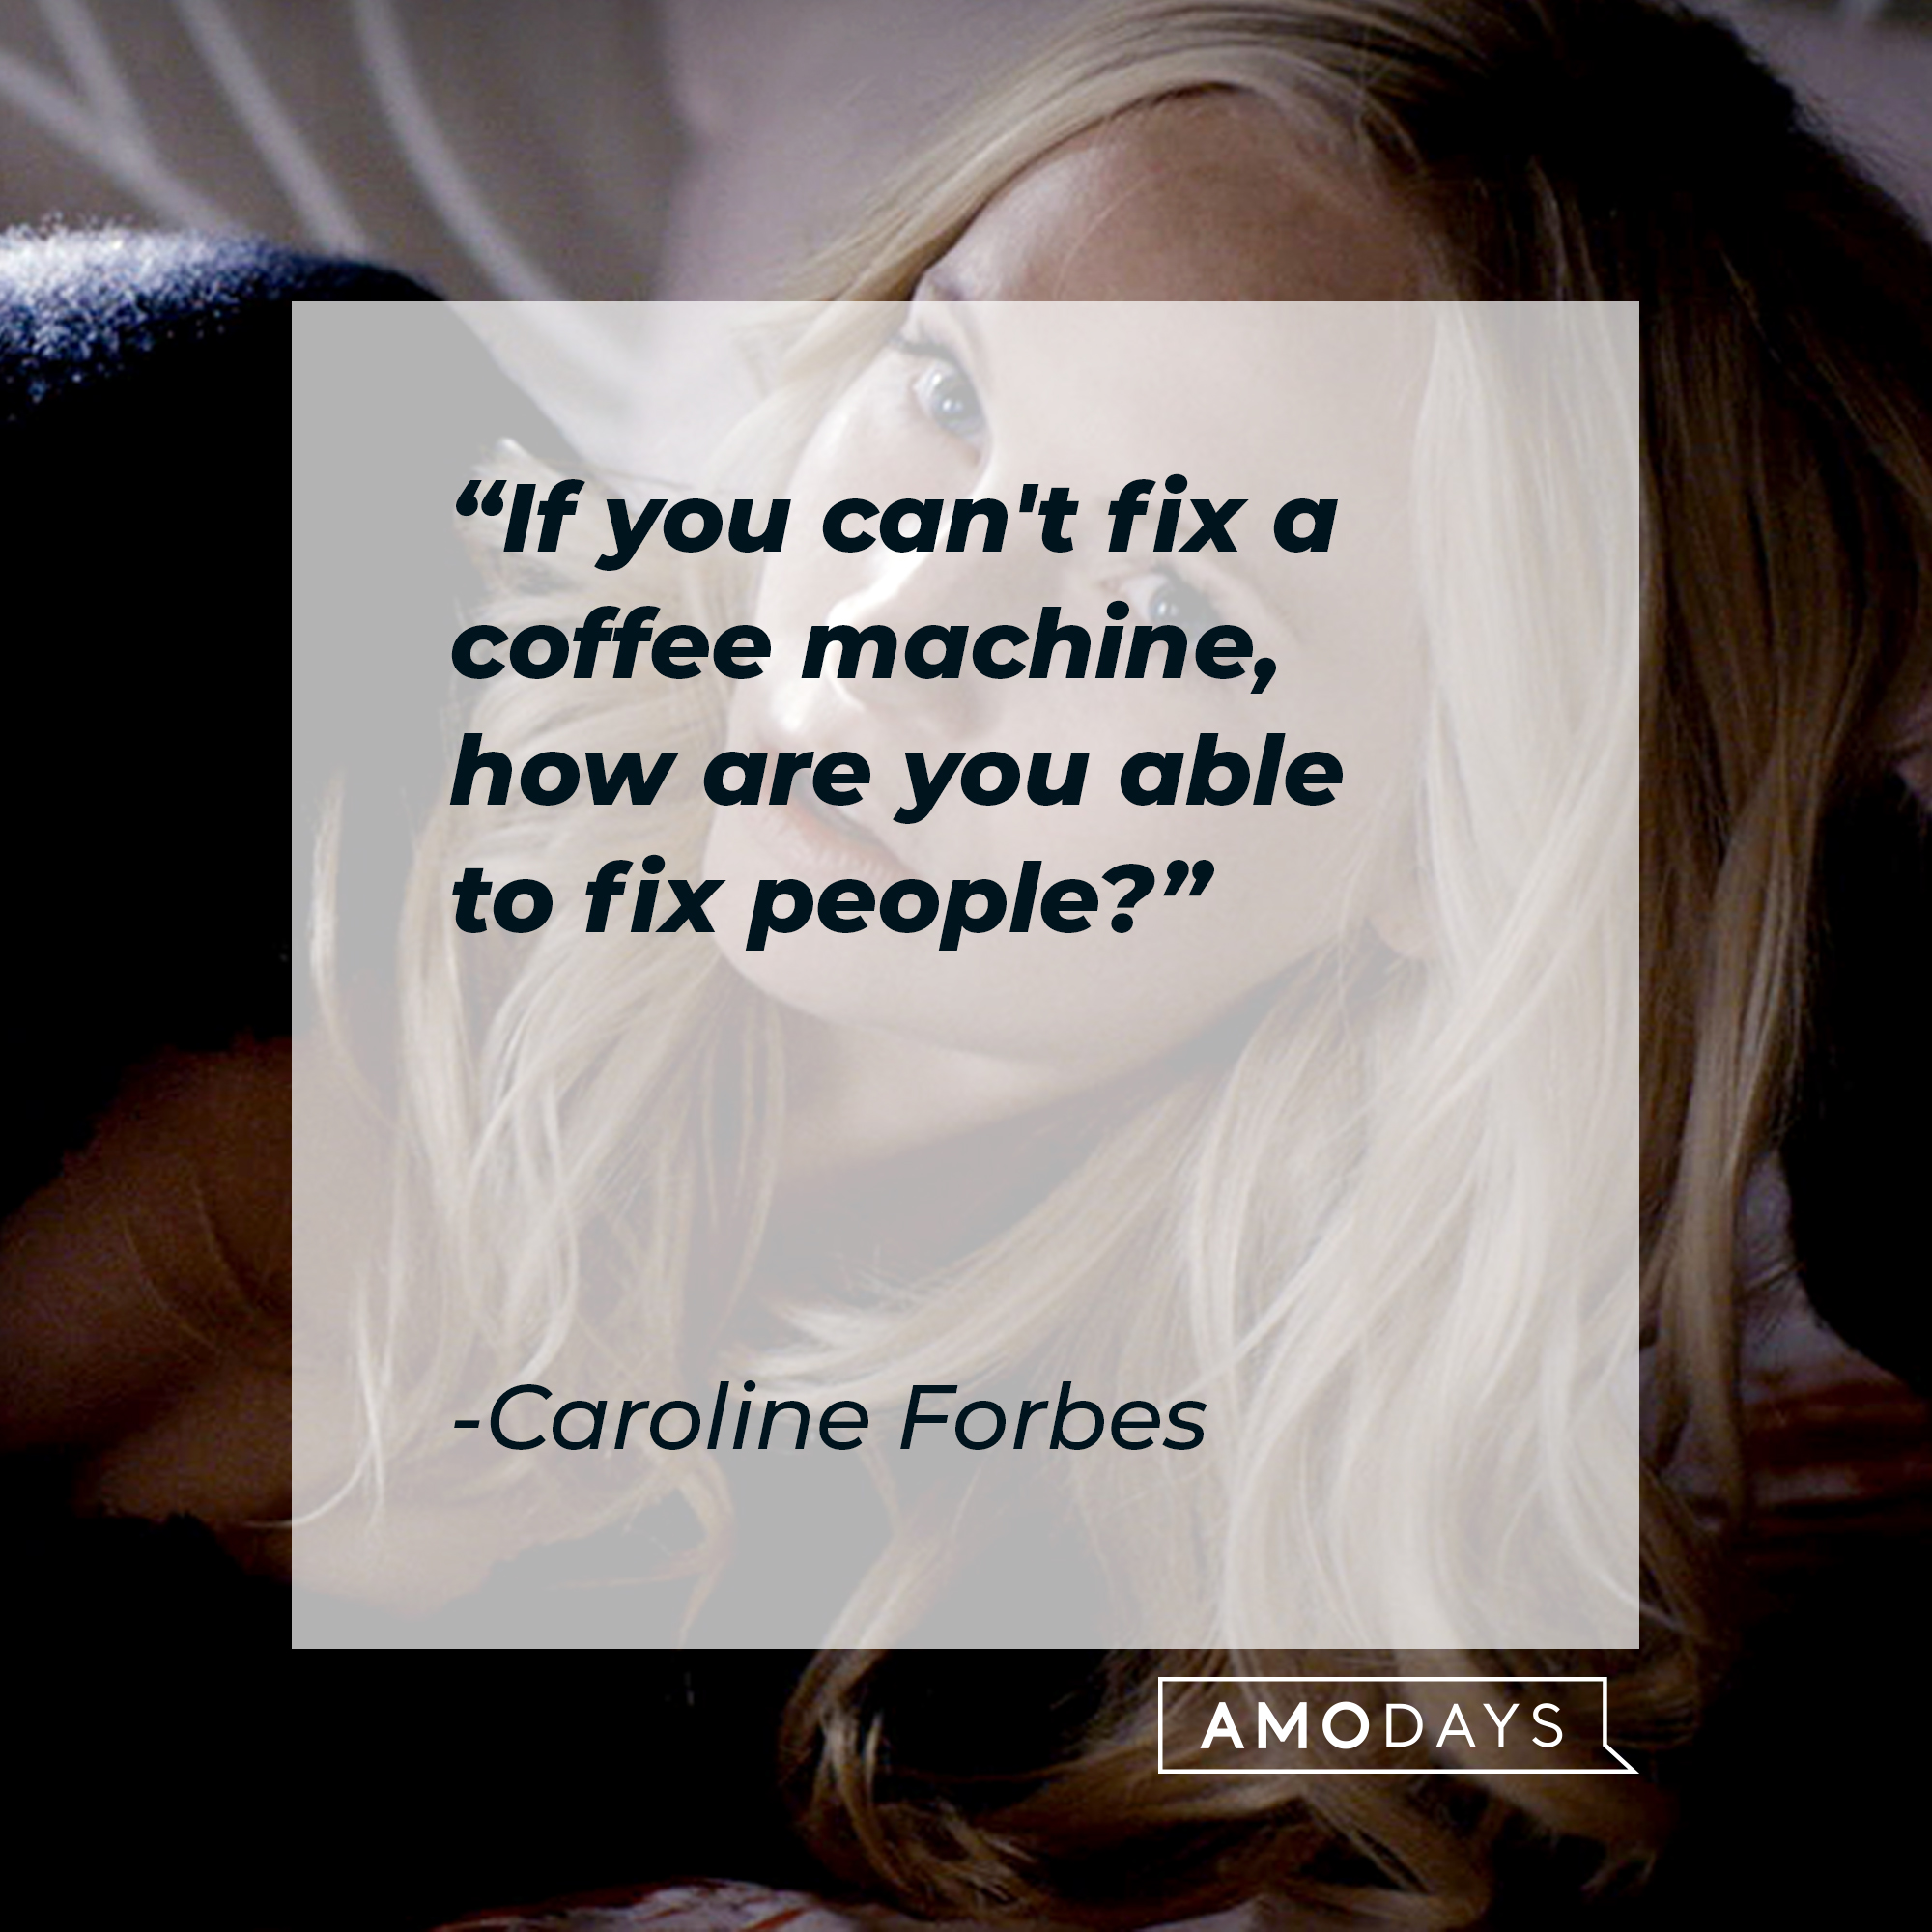 Caroline Forbes' quote: "If you can't fix a coffee machine, how are you able to fix people?" | Source: Facebook.com/thevampirediaries